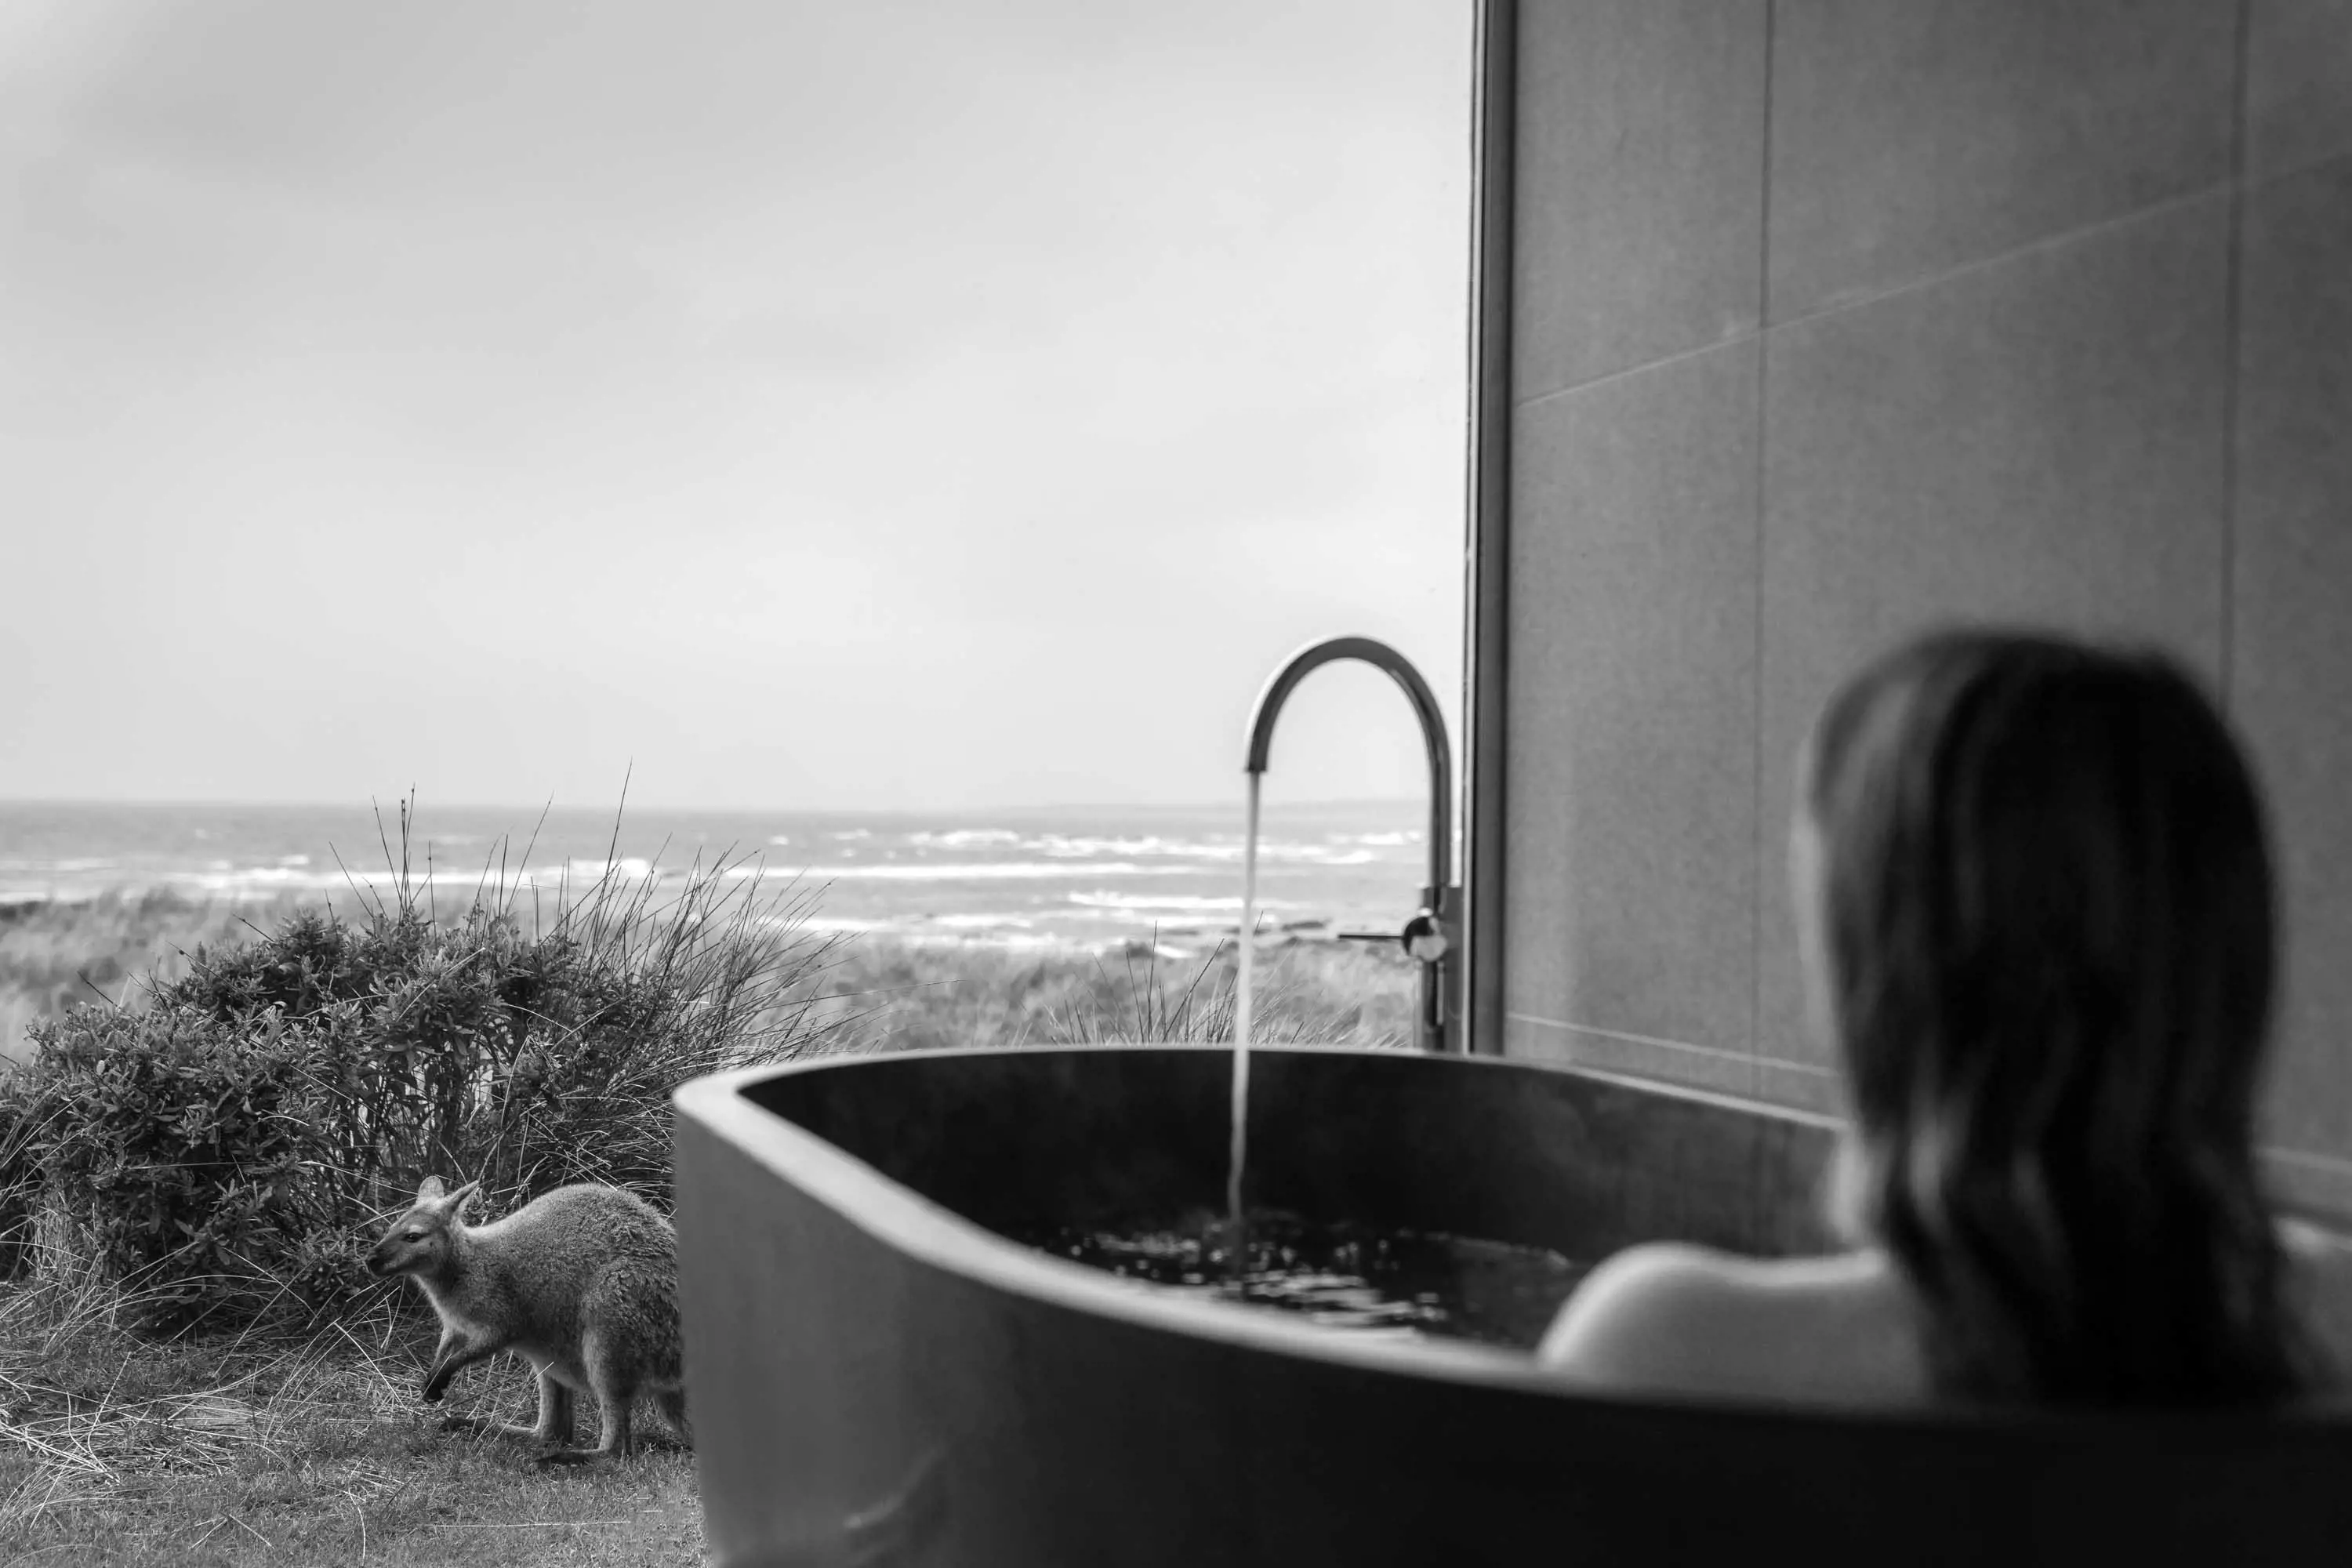 A woman reclines in a large outdoor bath and looks out over a beach in the distance, while a small kangaroo sits nearby.